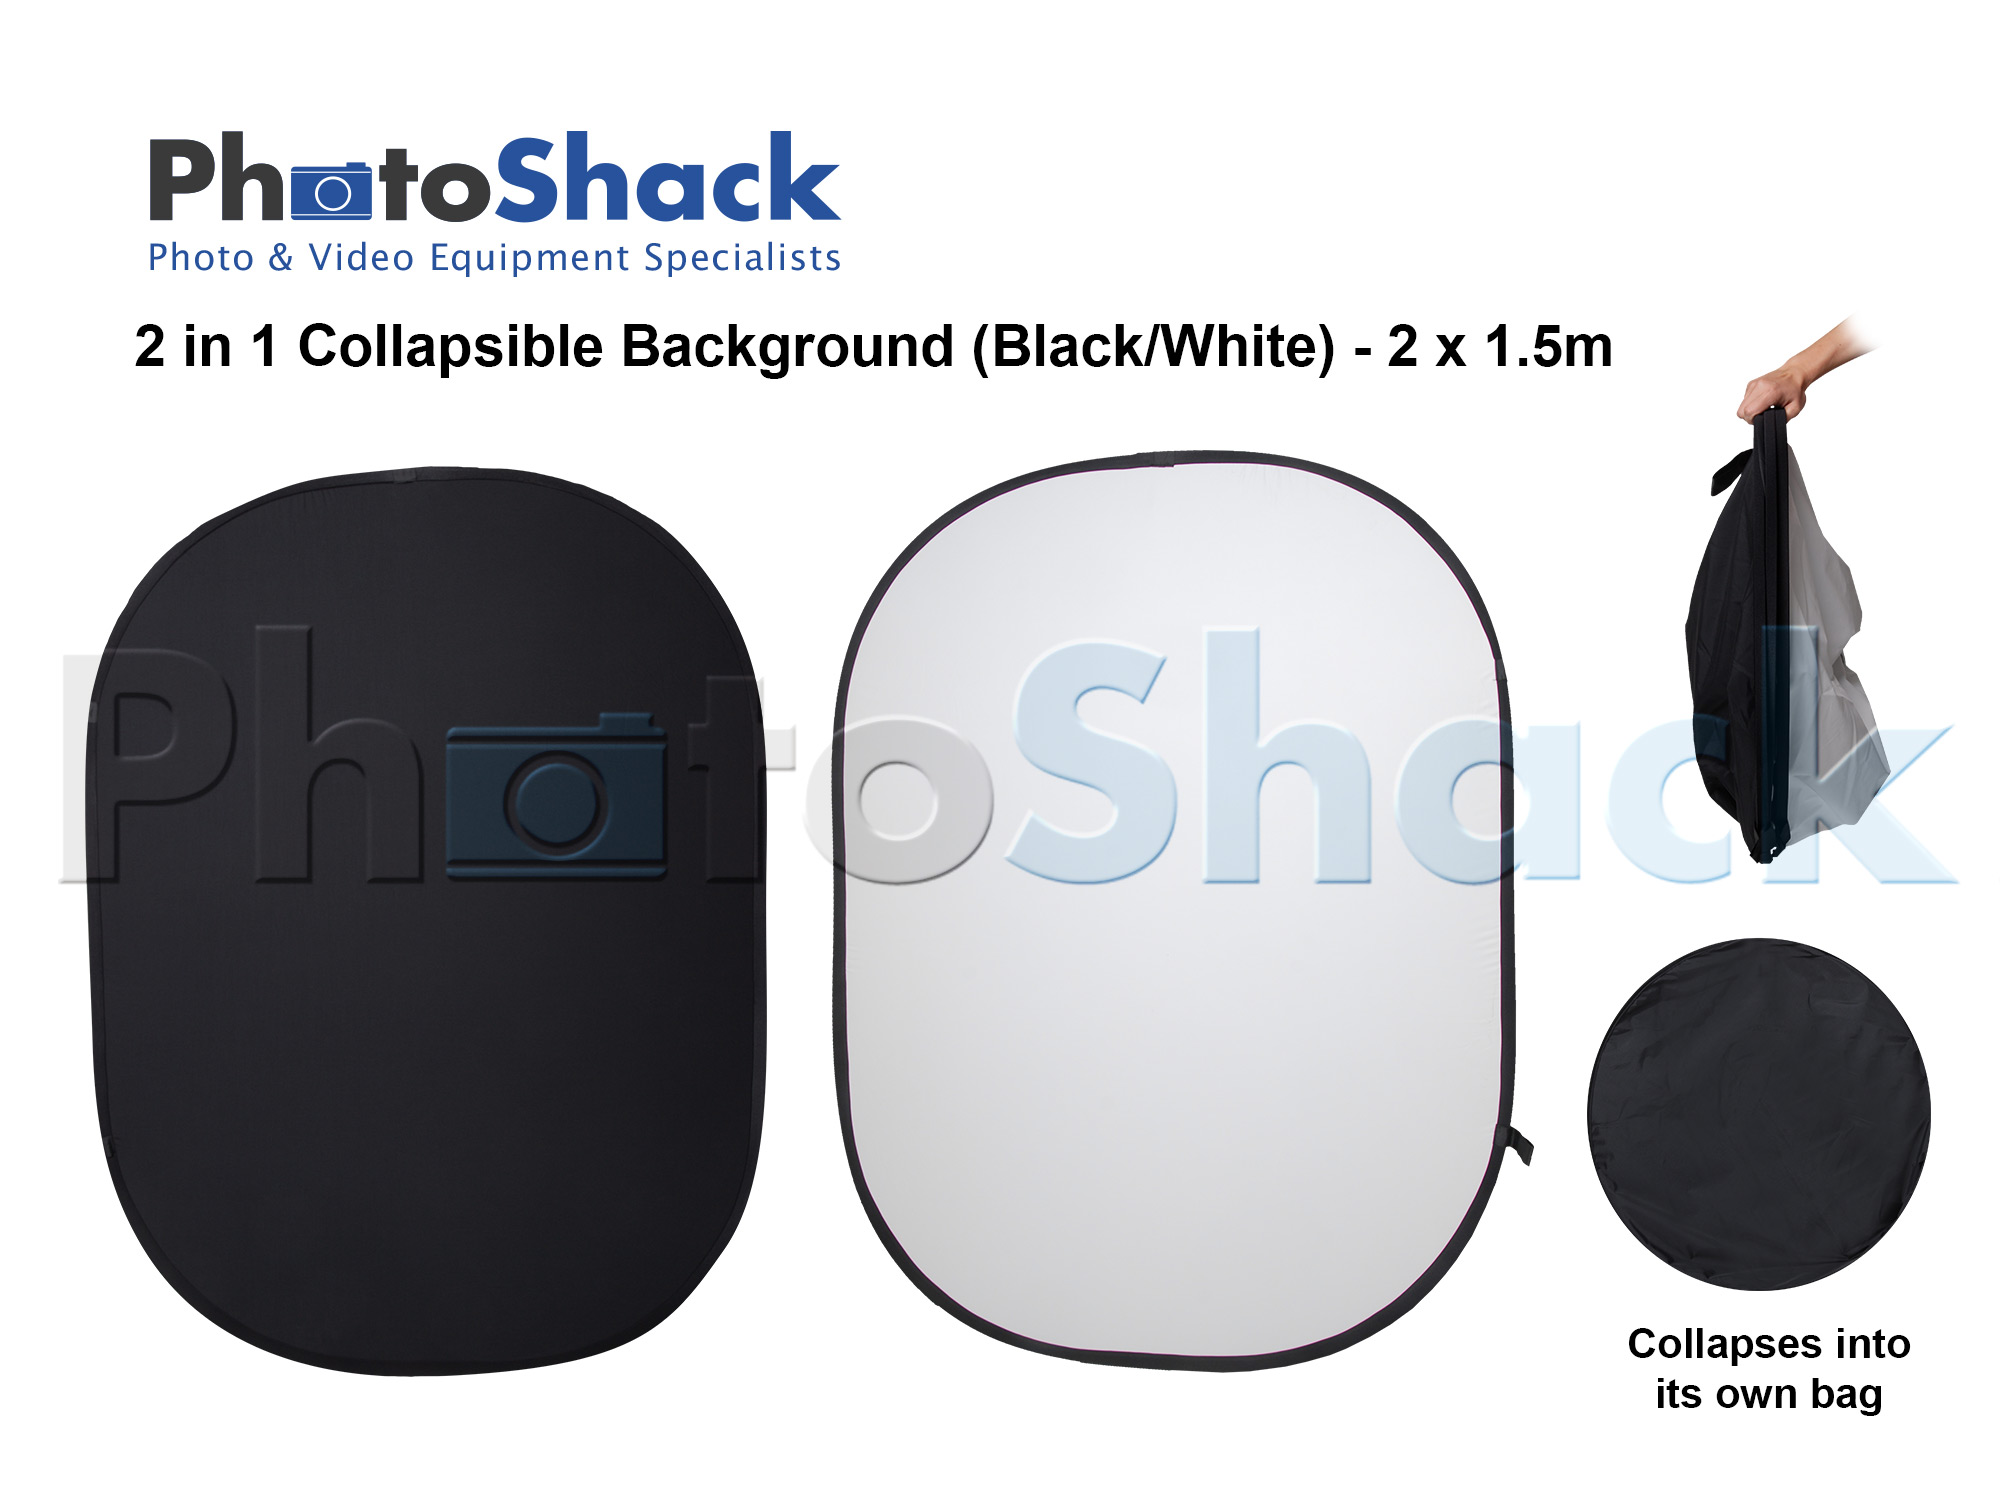 Black / White Collapsible Background & Reflector